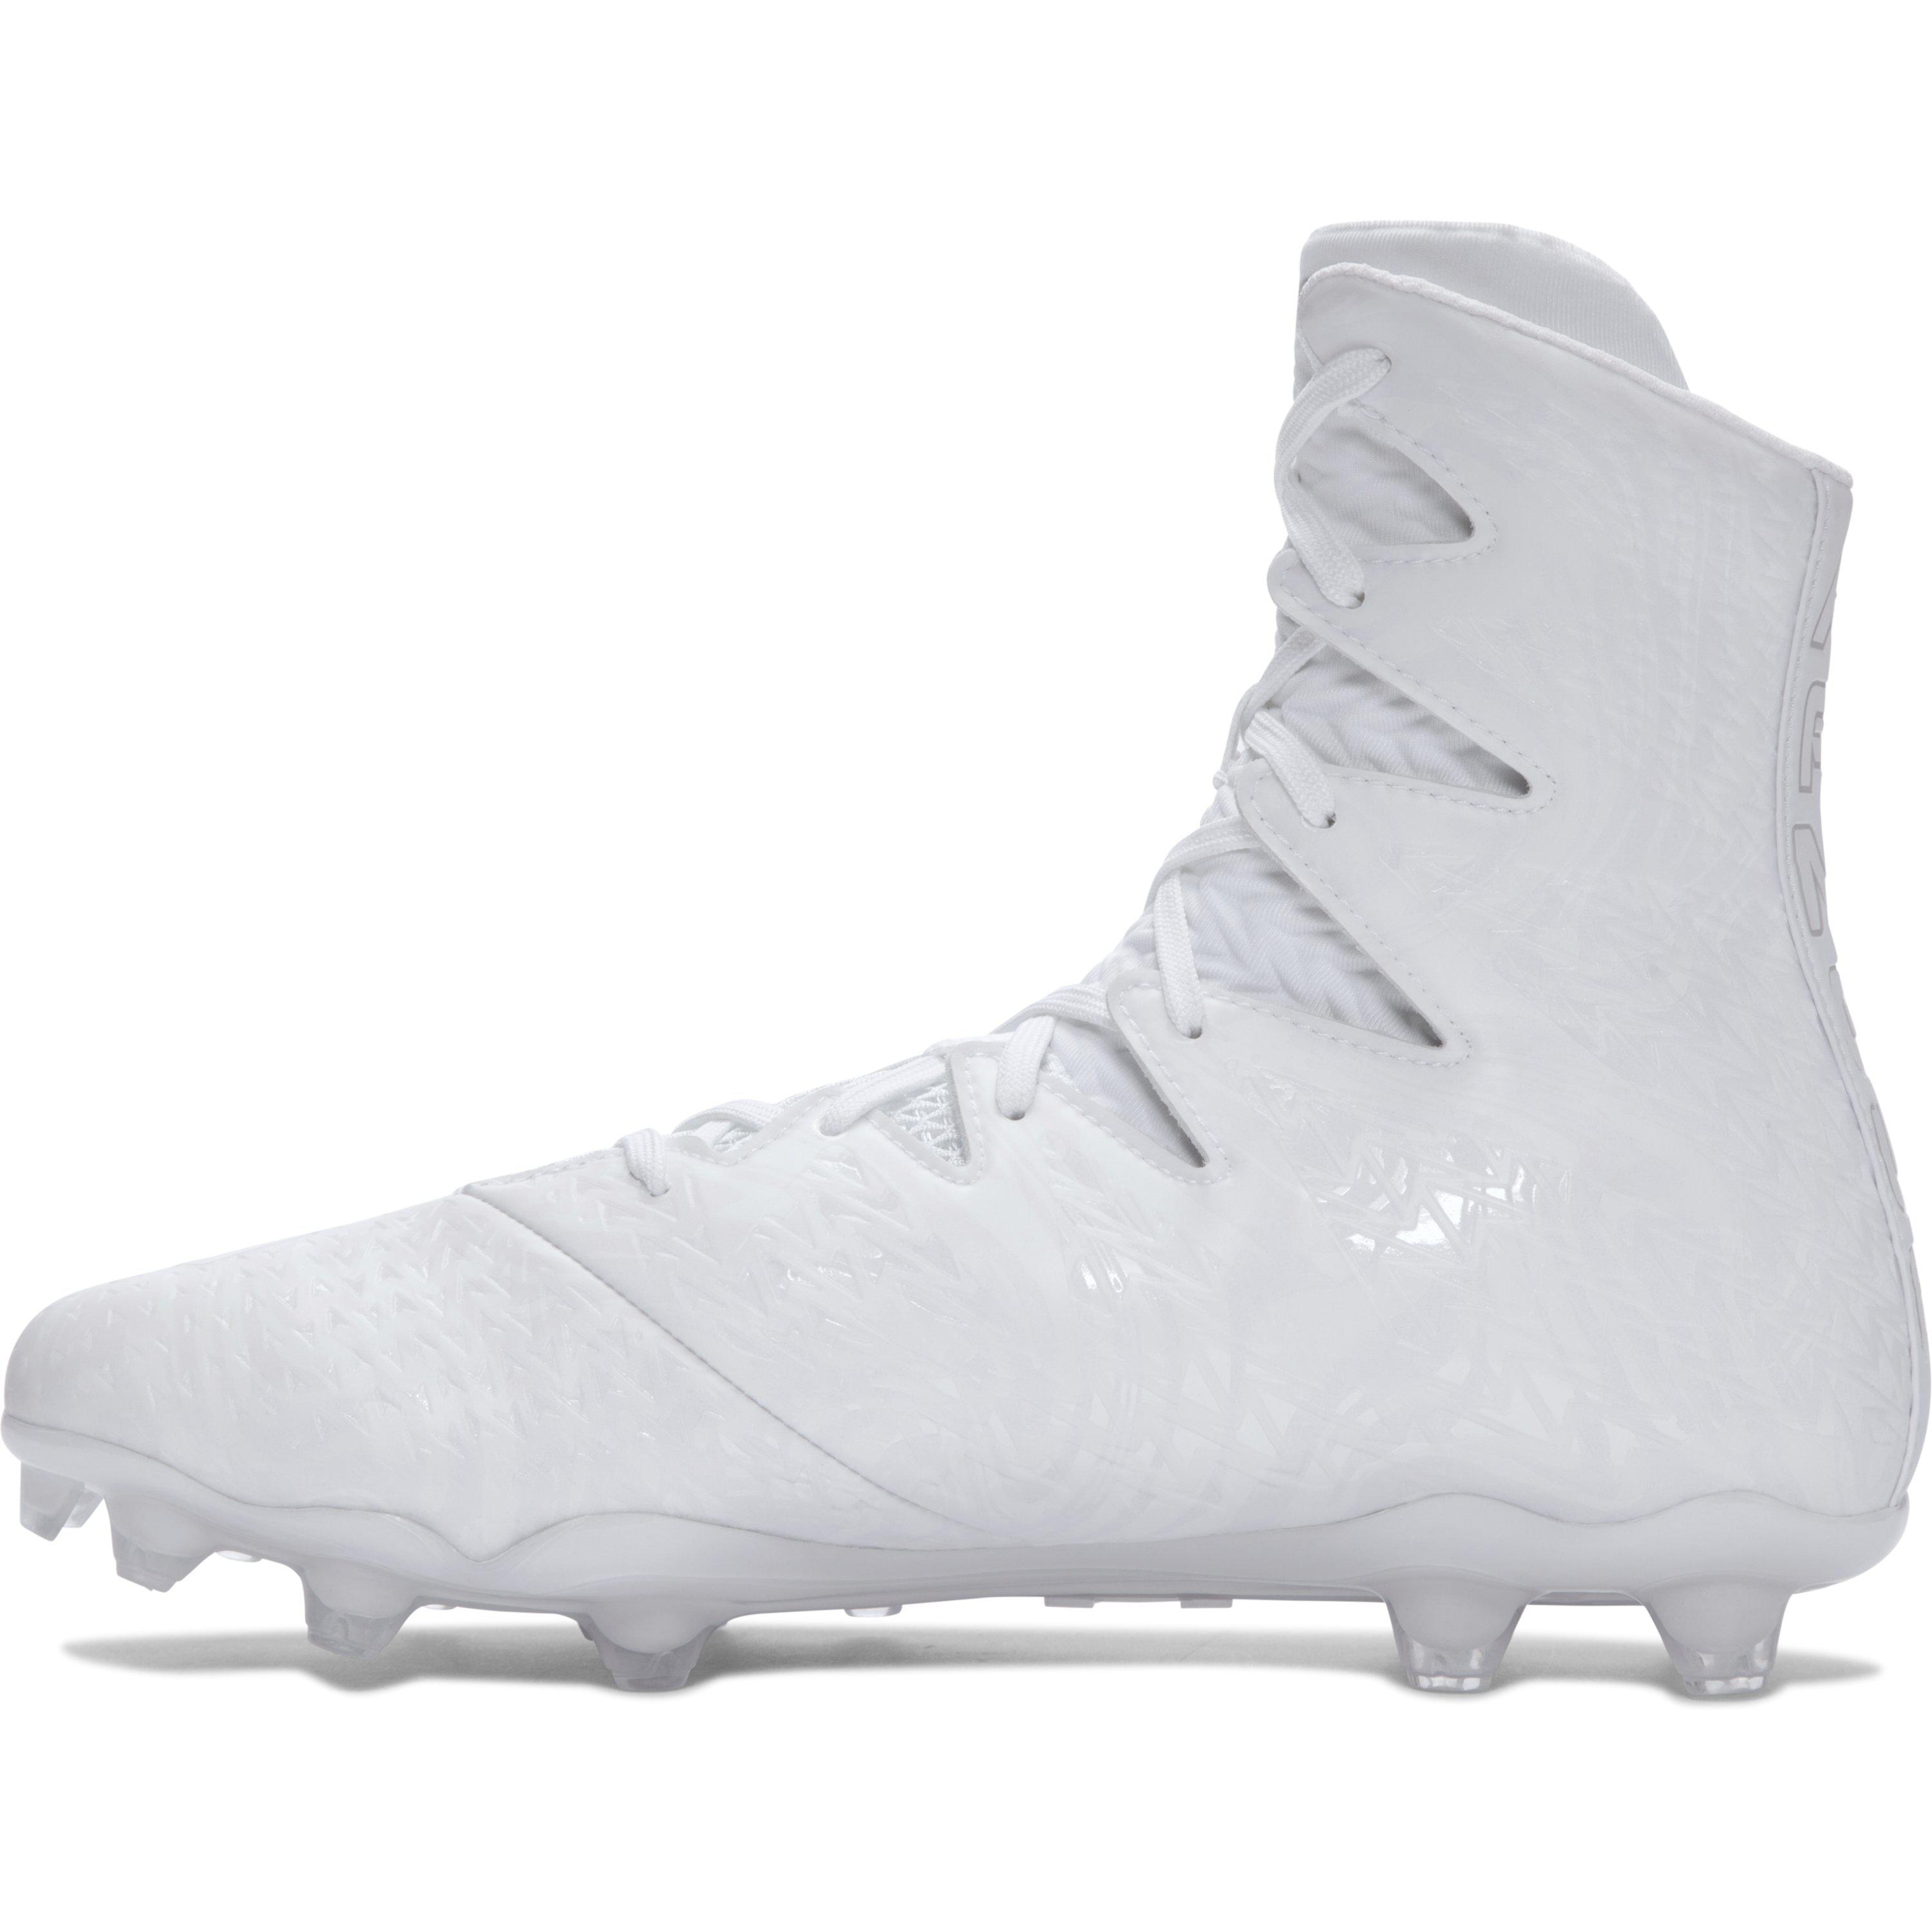 Under Armour Highlight MC Mens High Top Football Cleats White/Red 1297358 161 